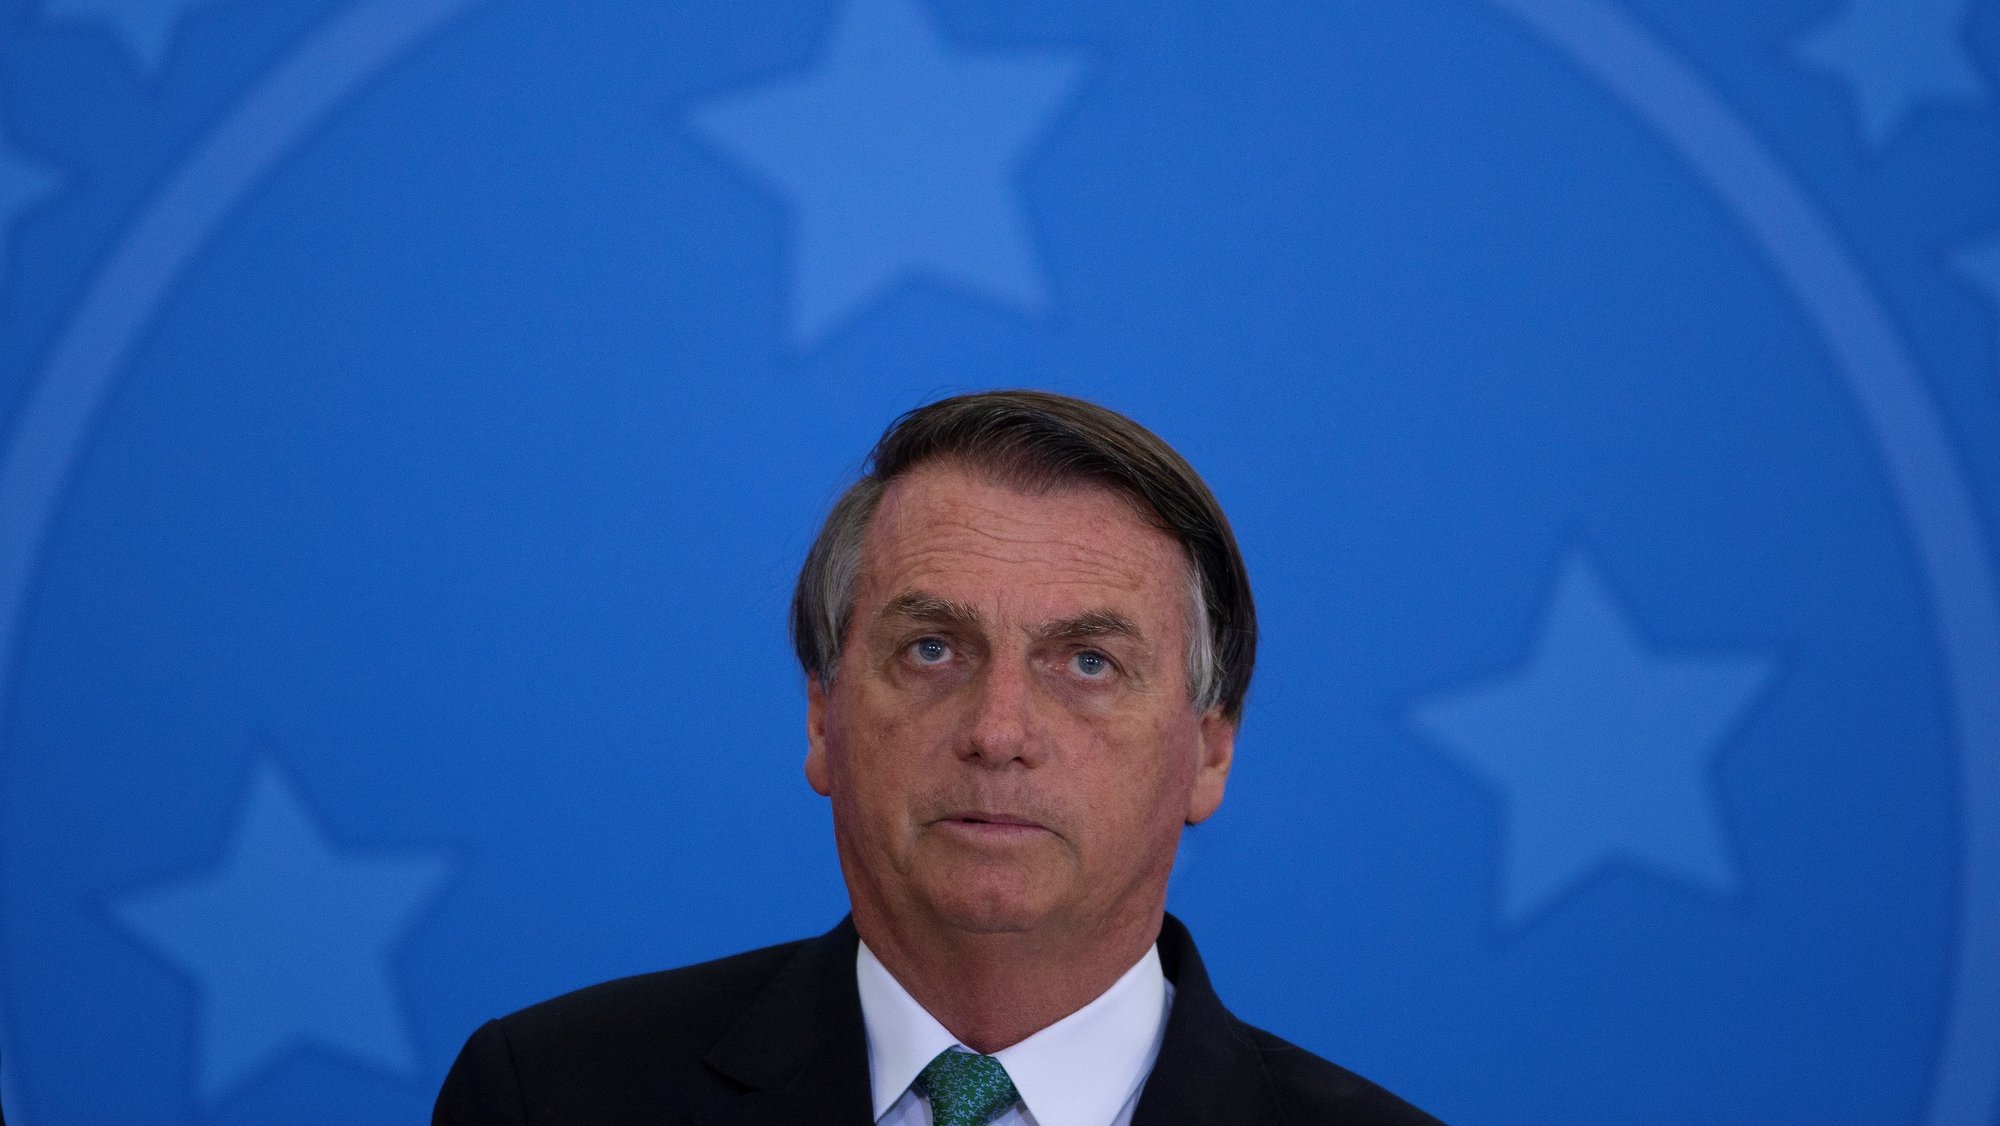 epa09641639 Brazilian President Jair Bolsonaro speaks during the launch of the Rodovida Program at the Planalto Palace, in Brasilia, Brazil, 14 December 2021. The Federal Police confirmed that it will summon the Brazilian President, Jair Bolsonaro, to testify in a process in which he is being investigated for a campaign he maintained against the electronic ballot boxes used in elections in the country.  EPA/Joedson Alves